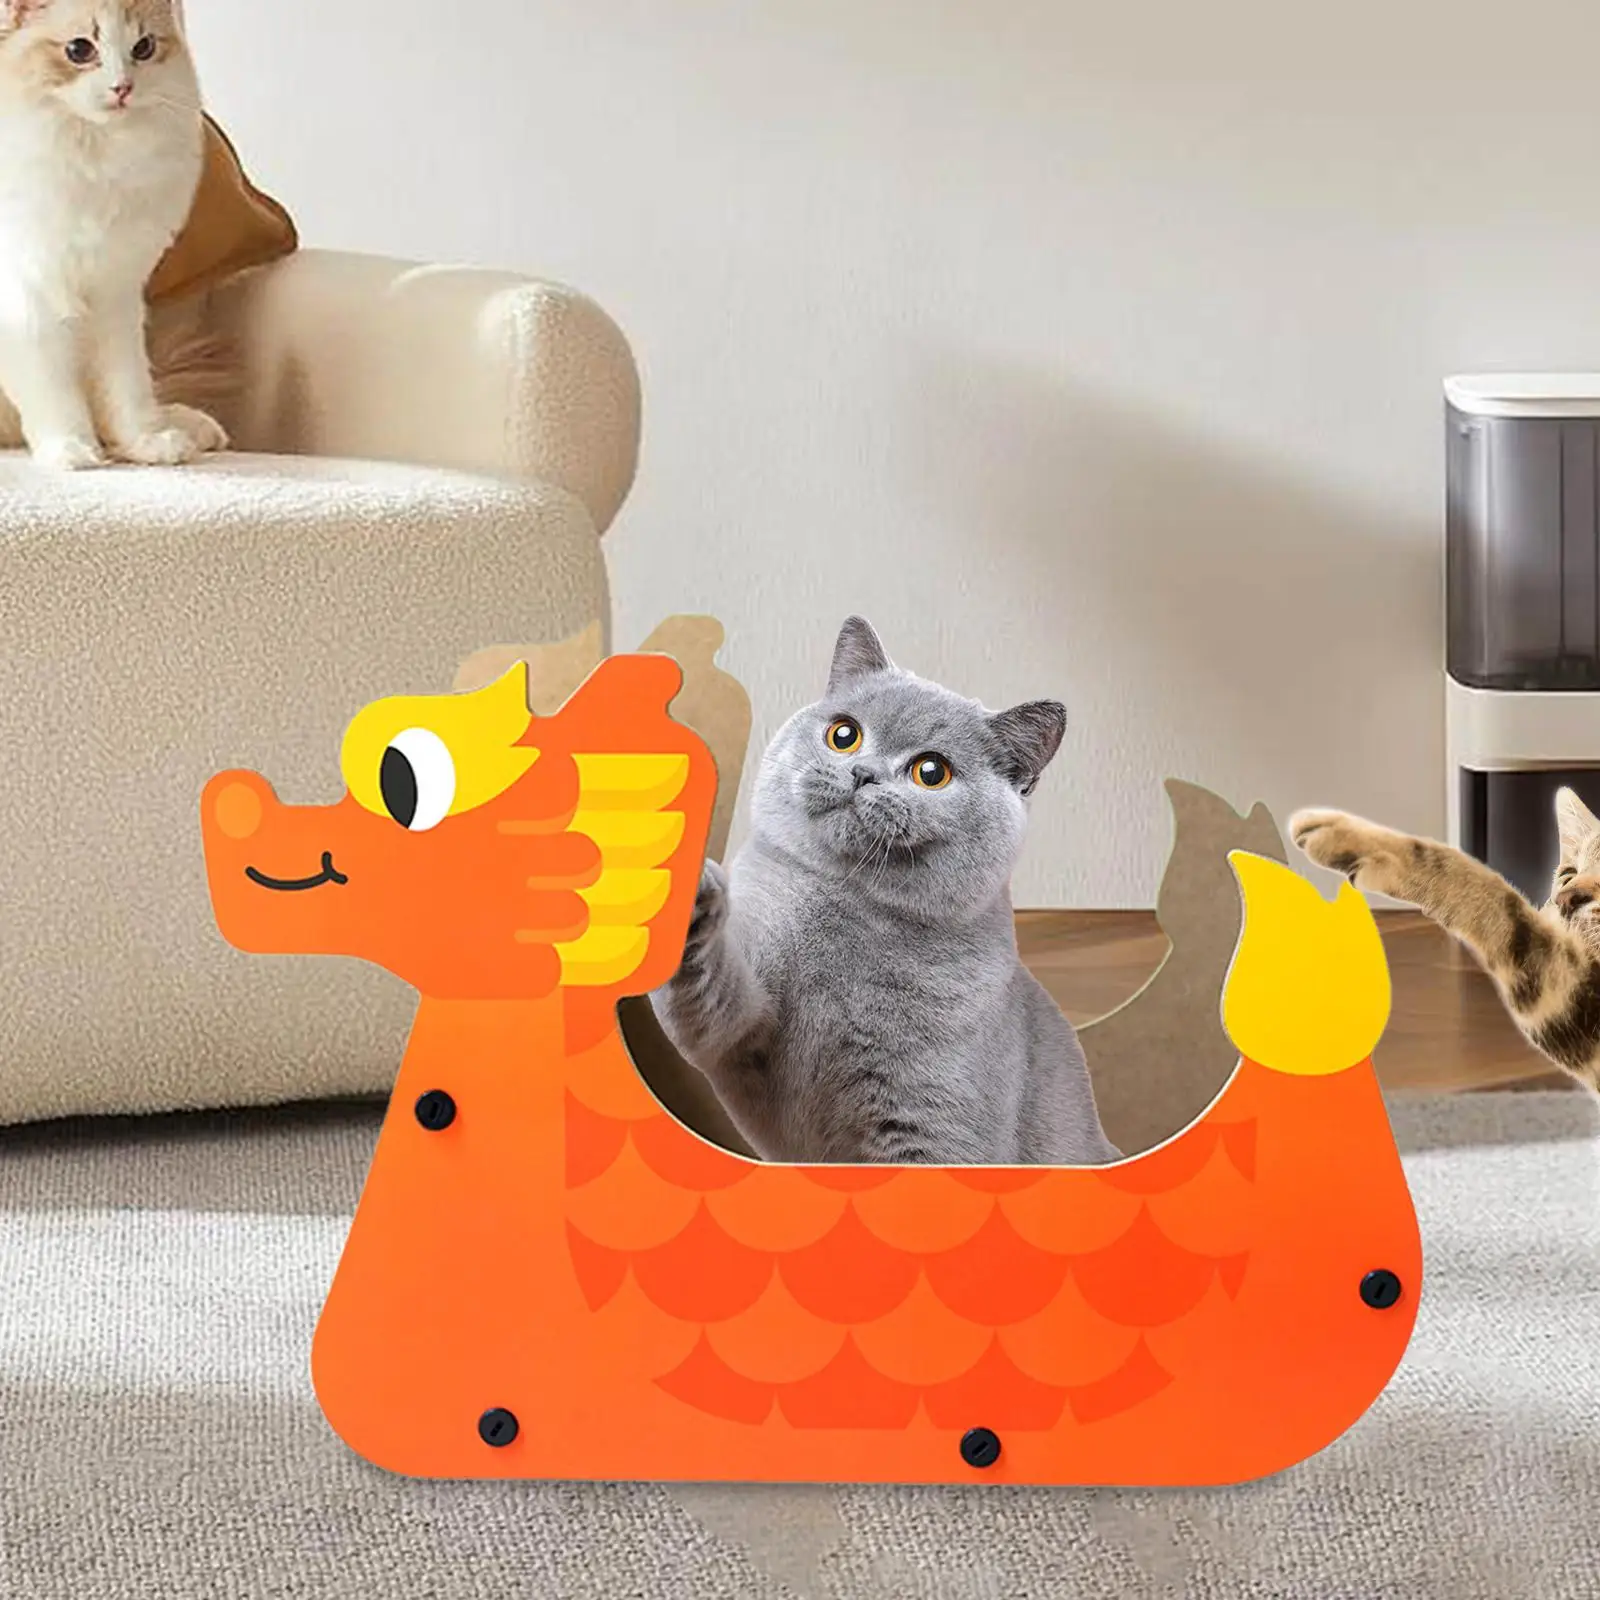 Cat Scratching Couch Corrugated Scratching Pad Furniture Protector Sofa Cat Scratcher for Grinding Claw Cats Scratching Sleeping